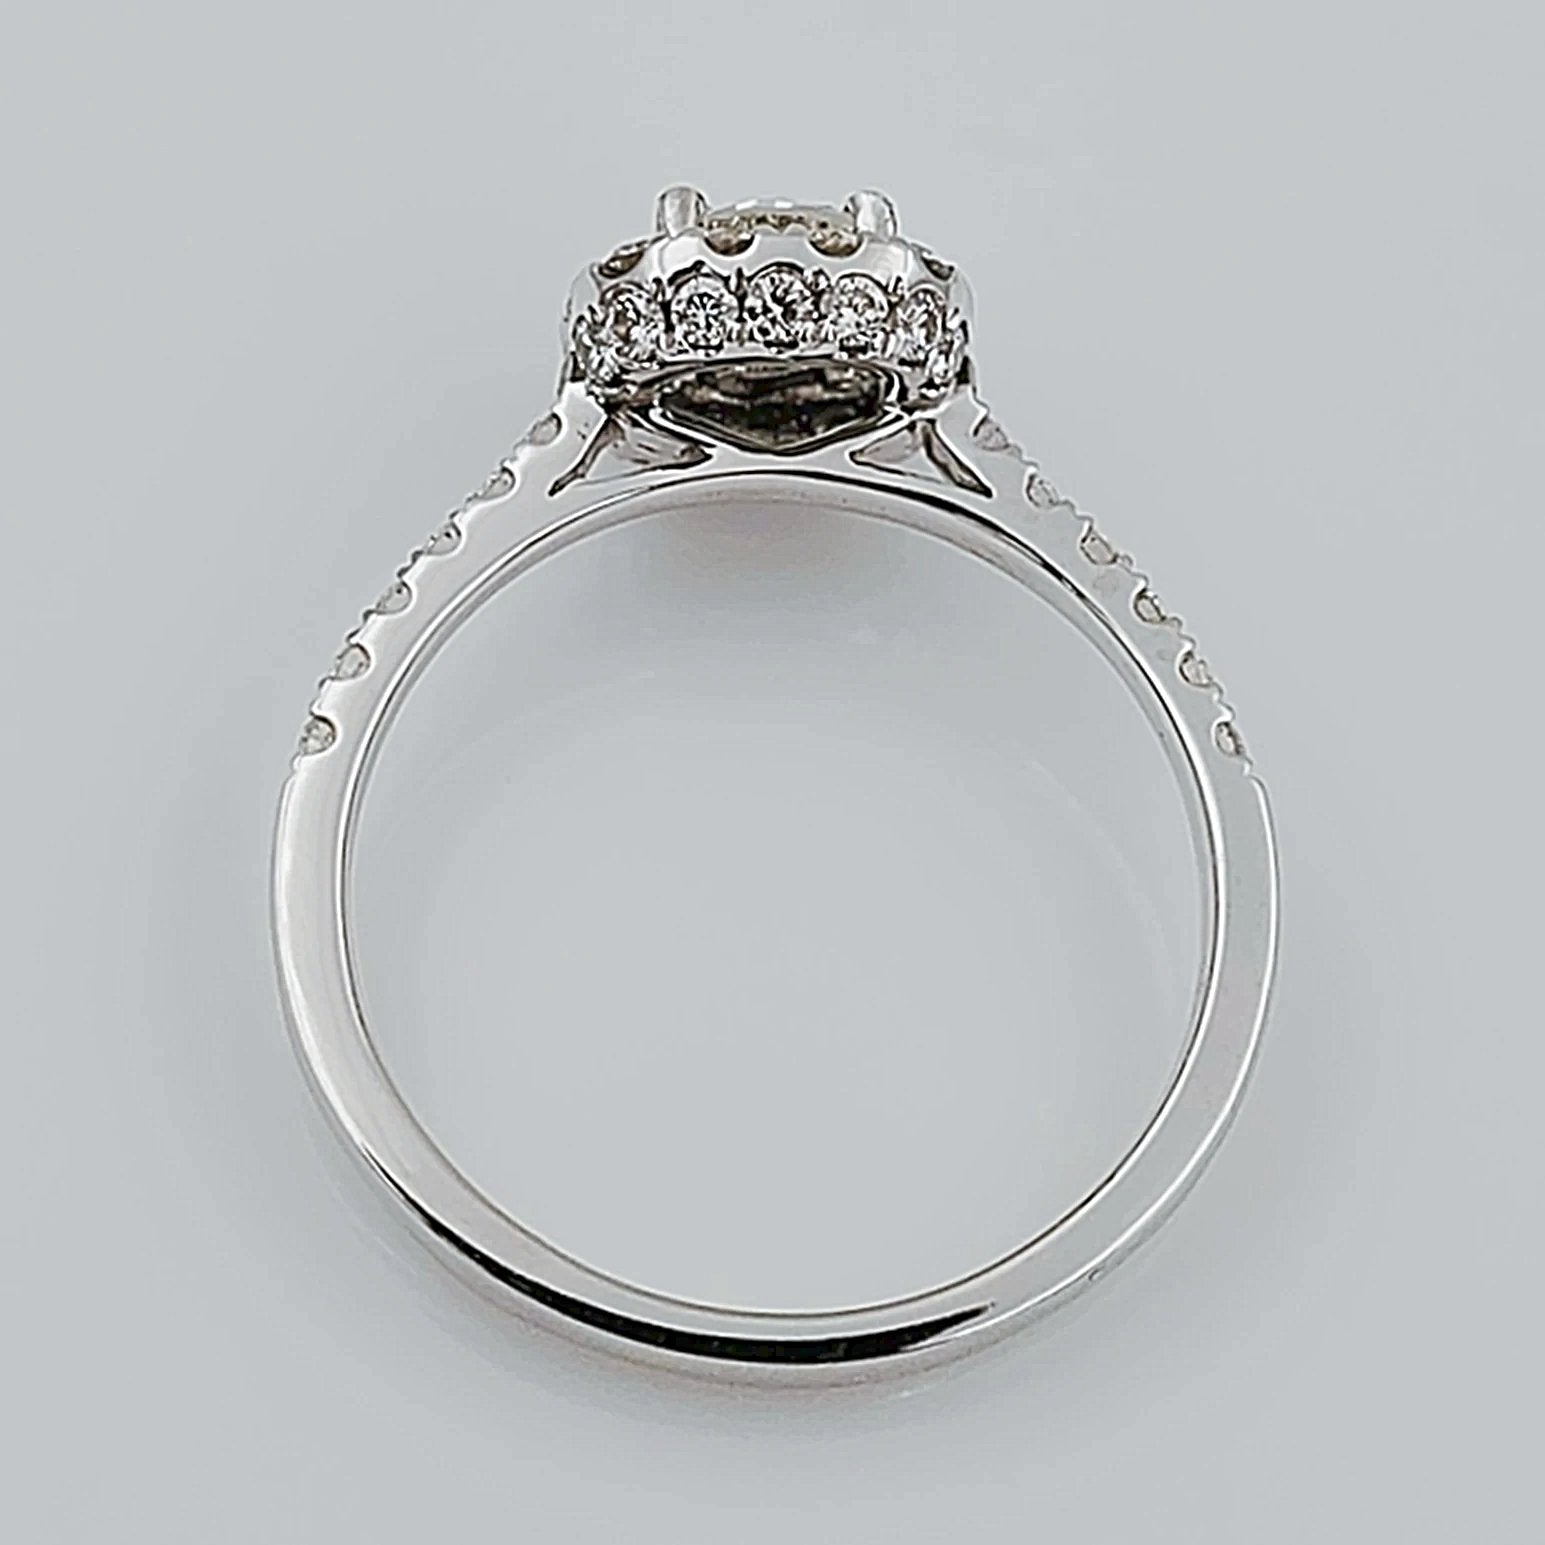 Women's 14K White Gold with 0.50 CT Round Center Diamond (SI2 Color I) 2.5 GR Total Weight Wedding Ring. (Size: 6.5)